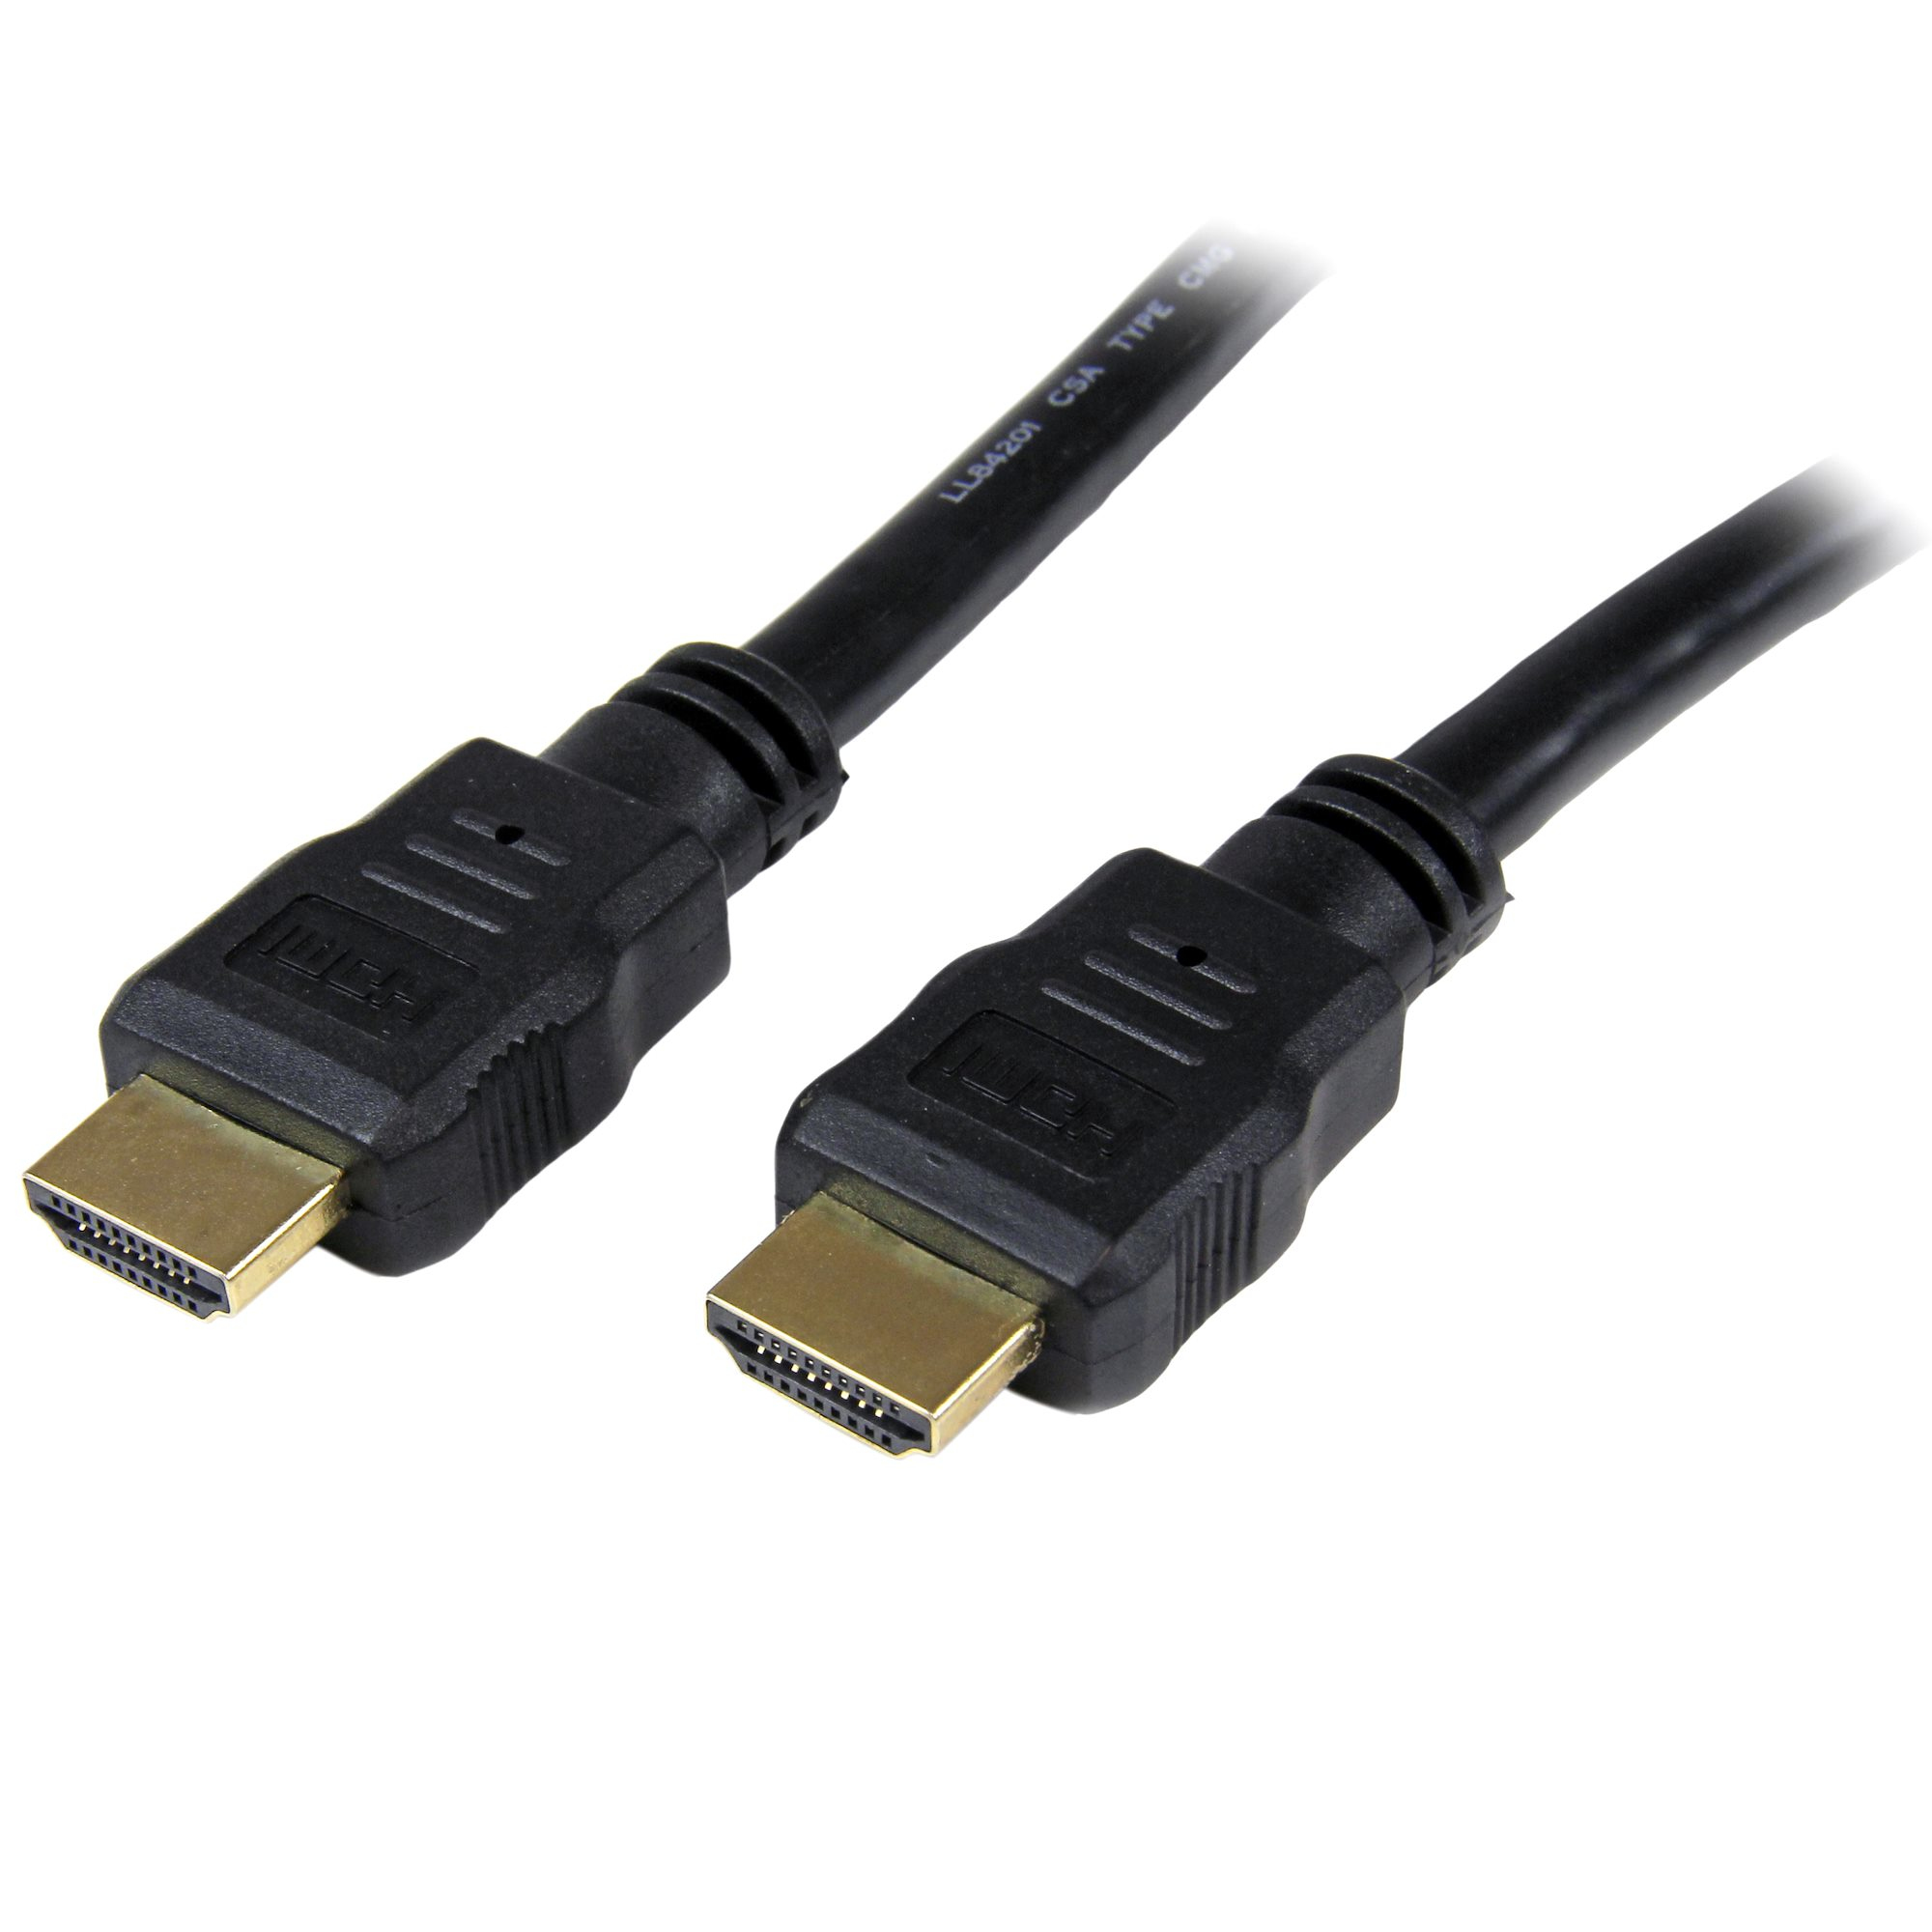 Photos - Cable (video, audio, USB) Startech.com 50cm  HDMI Cable - 4K High Speed HDMI Cable with E HDM (1.6ft)